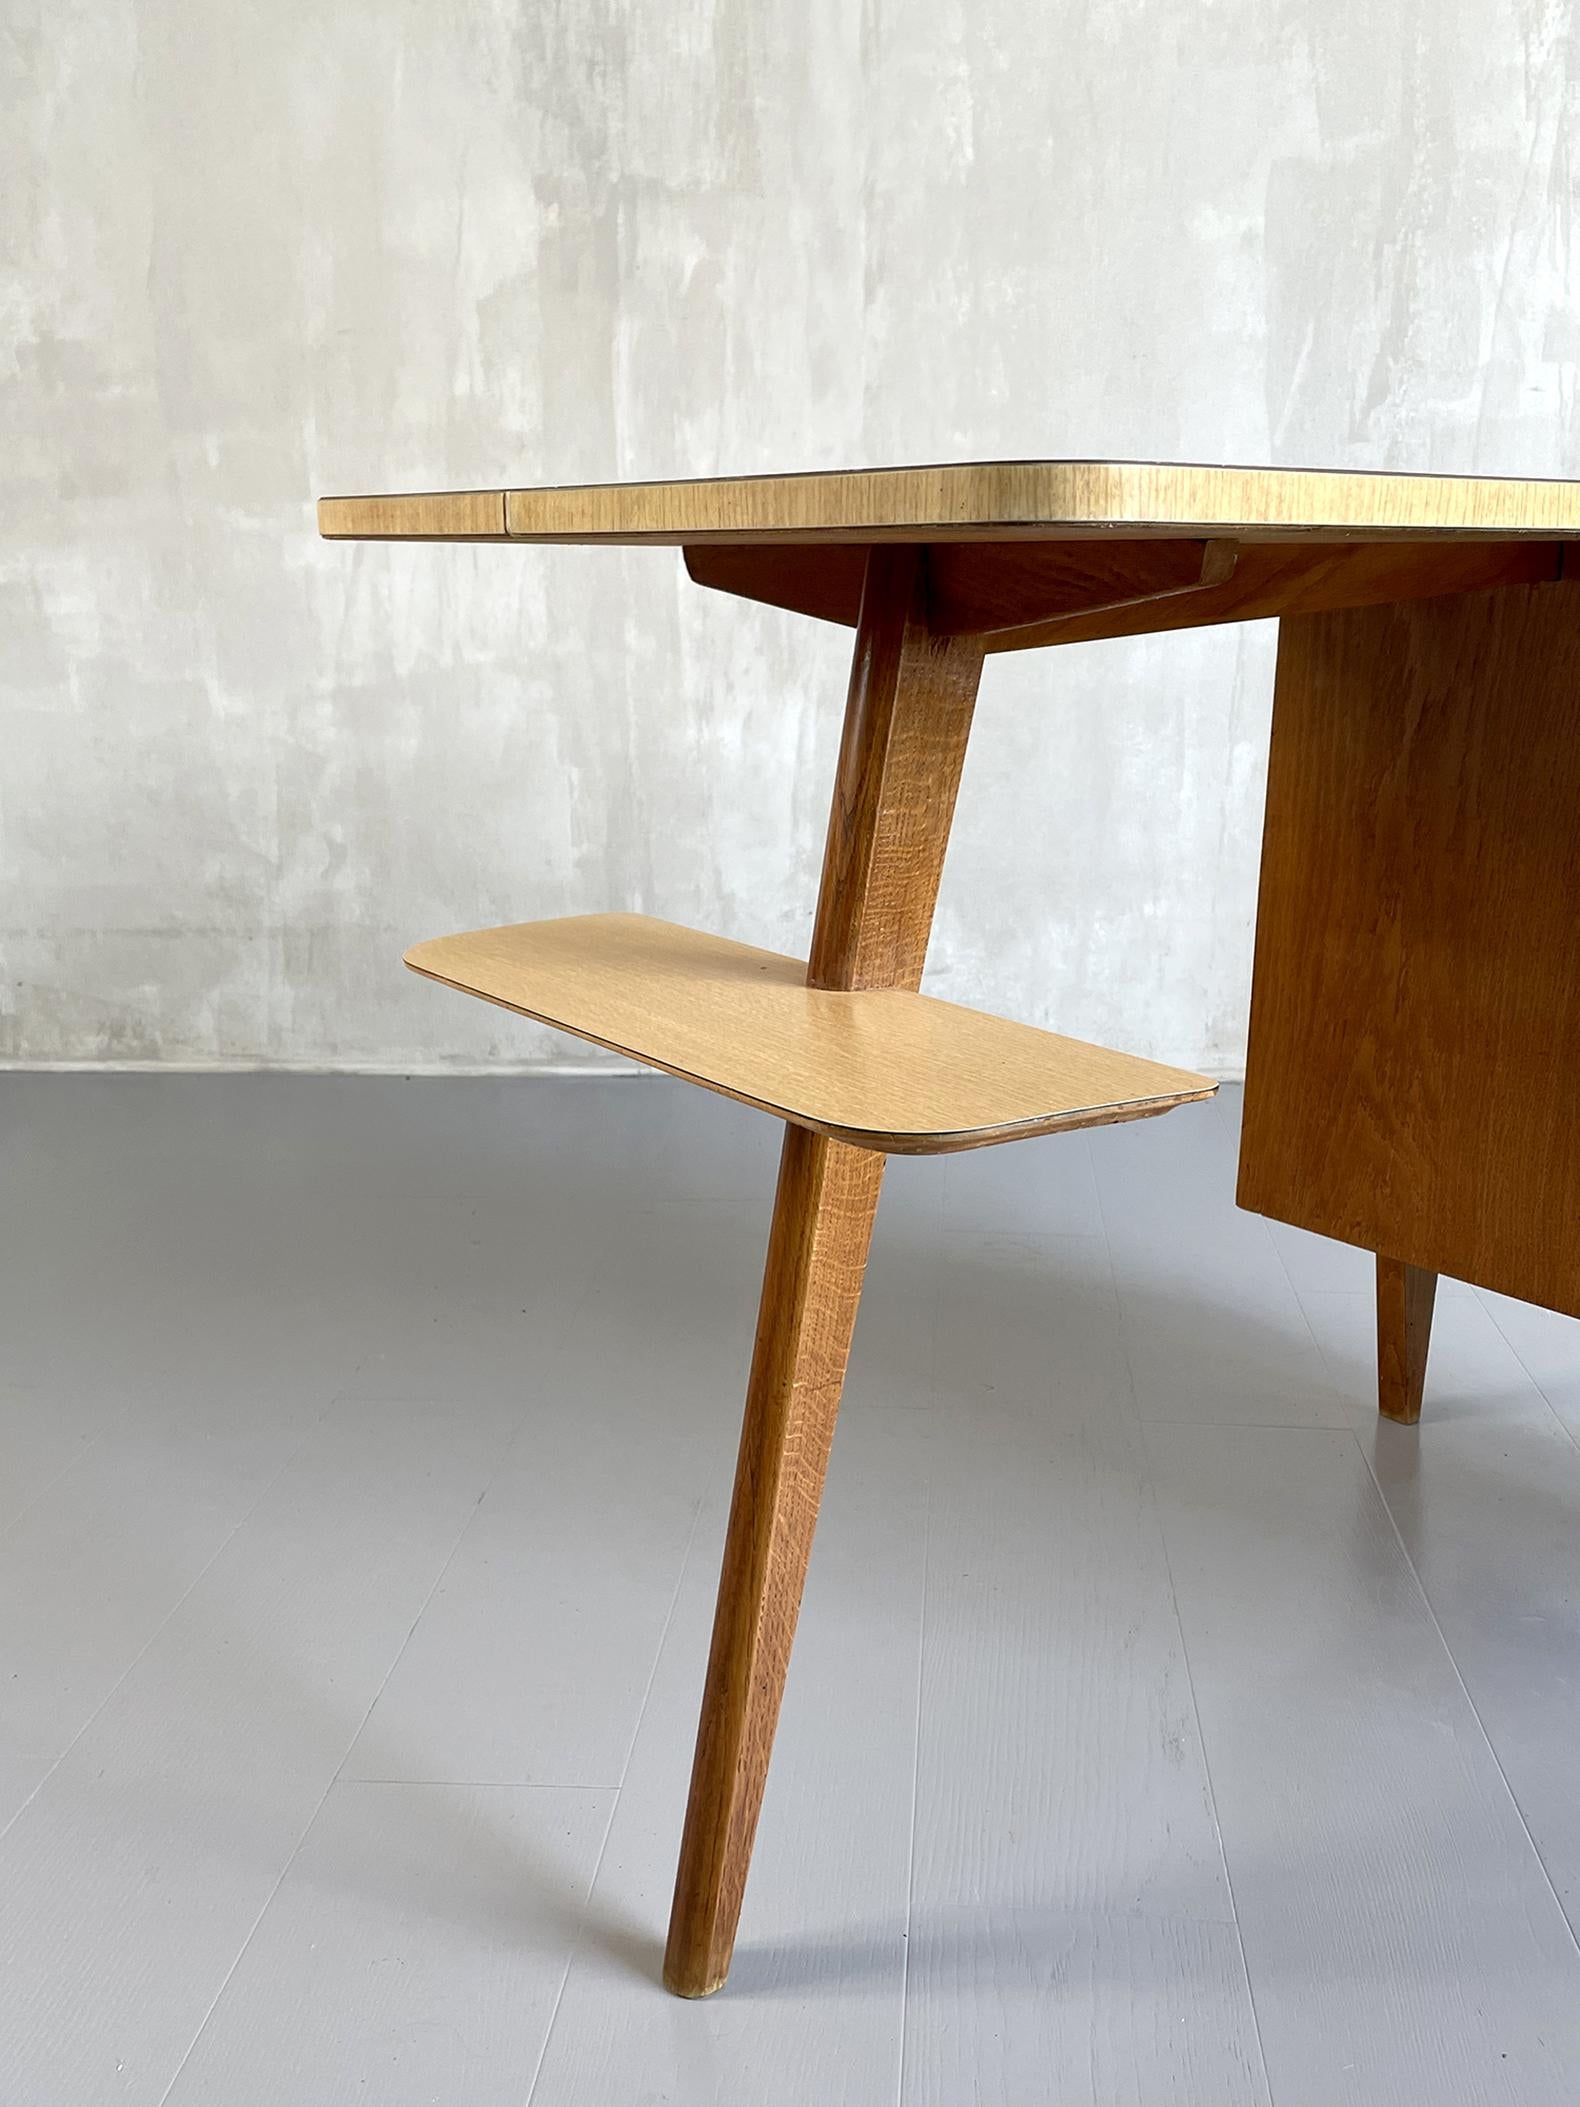 Tripod desk in blond oak and satin formica by Jacques Hauville, France 1950. A box with three drawers is placed on the right, a housing is located under the top. A profiled shelf is attached to the left leg.